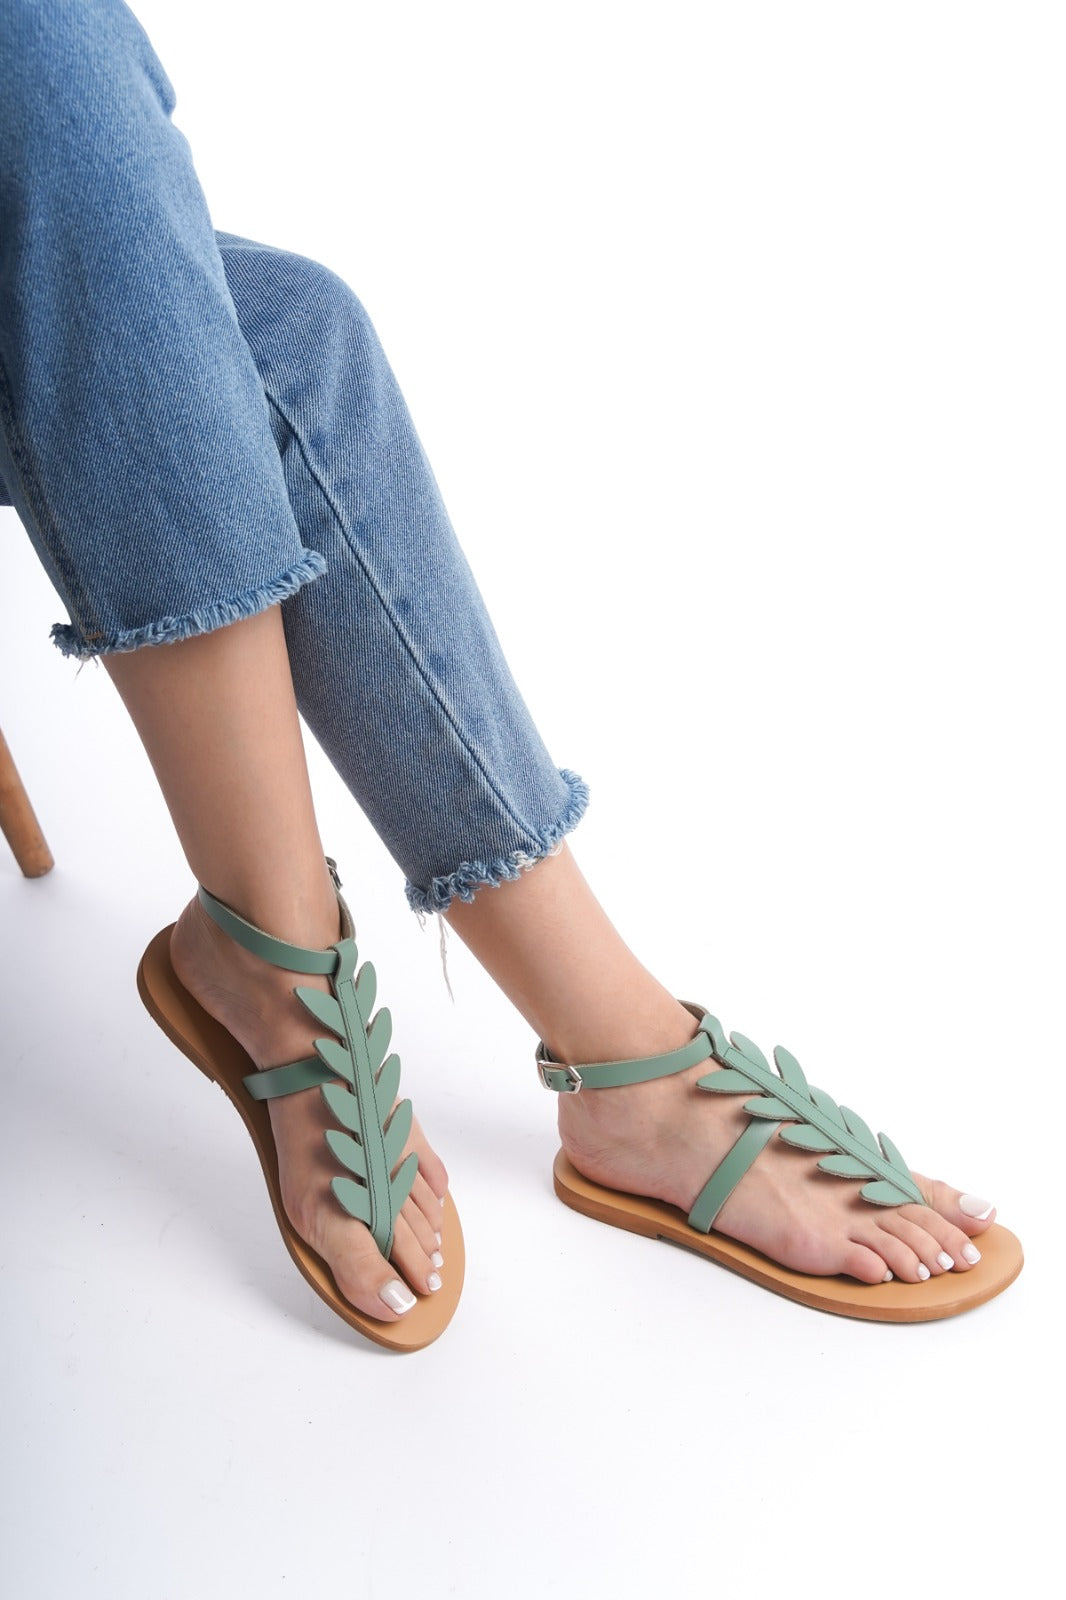 Leather Floral T-Strap Sandal for Women Turquoise